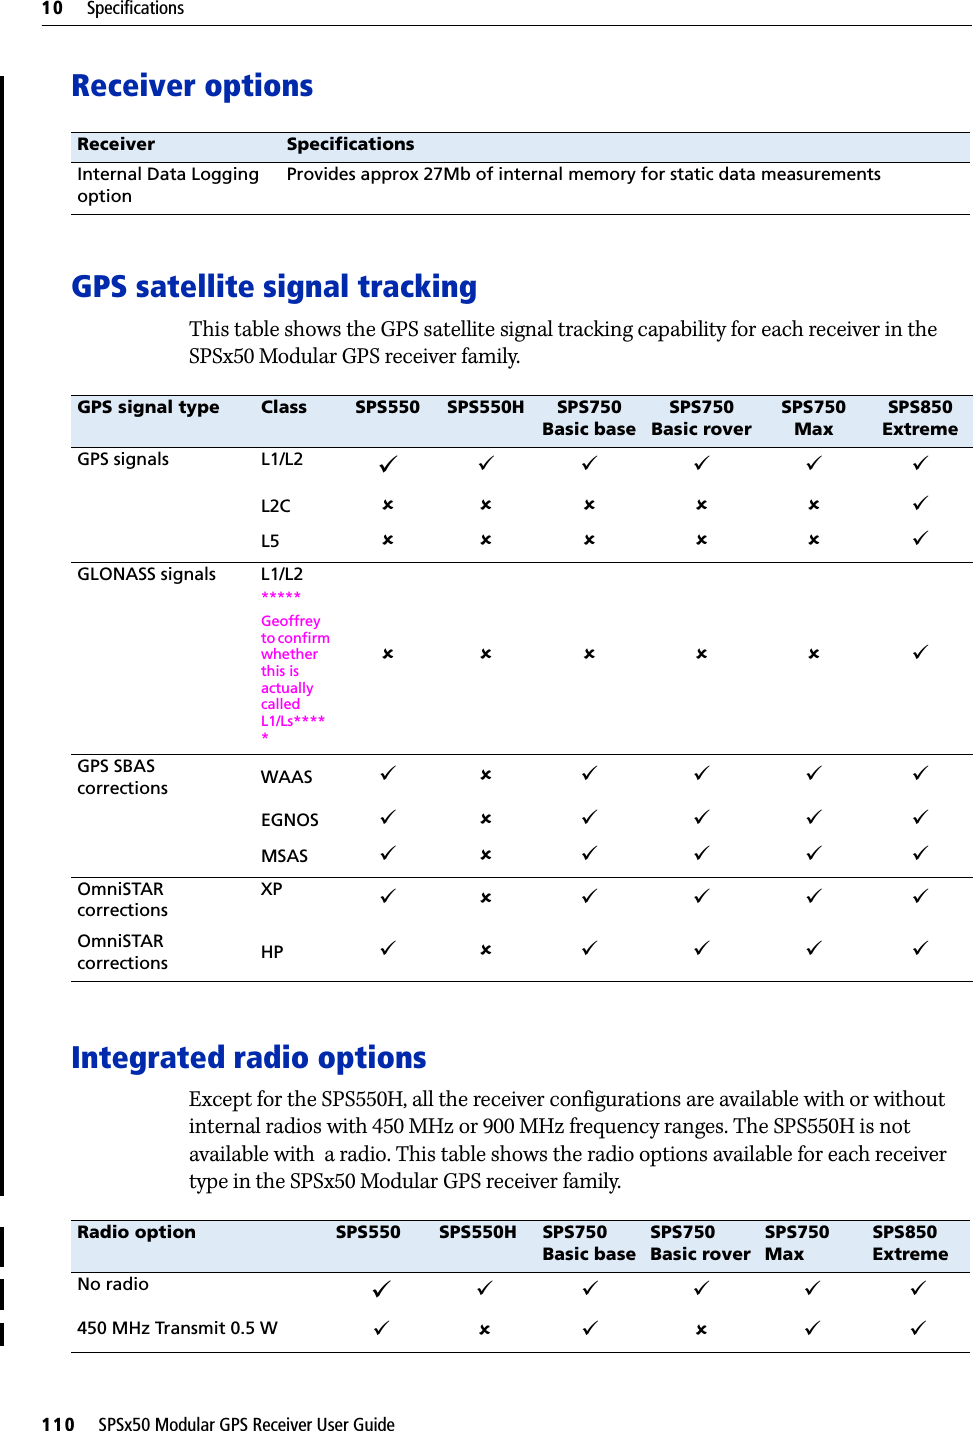 10     Specifications110     SPSx50 Modular GPS Receiver User GuideReceiver options GPS satellite signal trackingThis table shows the GPS satellite signal tracking capability for each receiver in the SPSx50 Modular GPS receiver family.Integrated radio optionsExcept for the SPS550H, all the receiver configurations are available with or without internal radios with 450 MHz or 900 MHz frequency ranges. The SPS550H is not available with  a radio. This table shows the radio options available for each receiver type in the SPSx50 Modular GPS receiver family.Receiver SpecificationsInternal Data Logging option Provides approx 27Mb of internal memory for static data measurementsGPS signal type Class SPS550 SPS550H SPS750 Basic baseSPS750 Basic roverSPS750 MaxSPS850 ExtremeGPS signals L1/L2 999 9 9 9L2C 88 8 8 8 9L5 88 8 8 8 9GLONASS signals L1/L2 *****Geoffrey to confirm whether this is actually called L1/Ls*****88 8 8 8 9GPS SBAS corrections WAAS 98 9 9 9 9EGNOS 98 9 9 9 9MSAS 98 9 9 9 9OmniSTAR correctionsXP 98 9 9 9 9OmniSTAR corrections HP 98 9 9 9 9Radio option SPS550 SPS550H SPS750 Basic baseSPS750 Basic roverSPS750 MaxSPS850 ExtremeNo radio 999999450 MHz Transmit 0.5 W 989 8 99